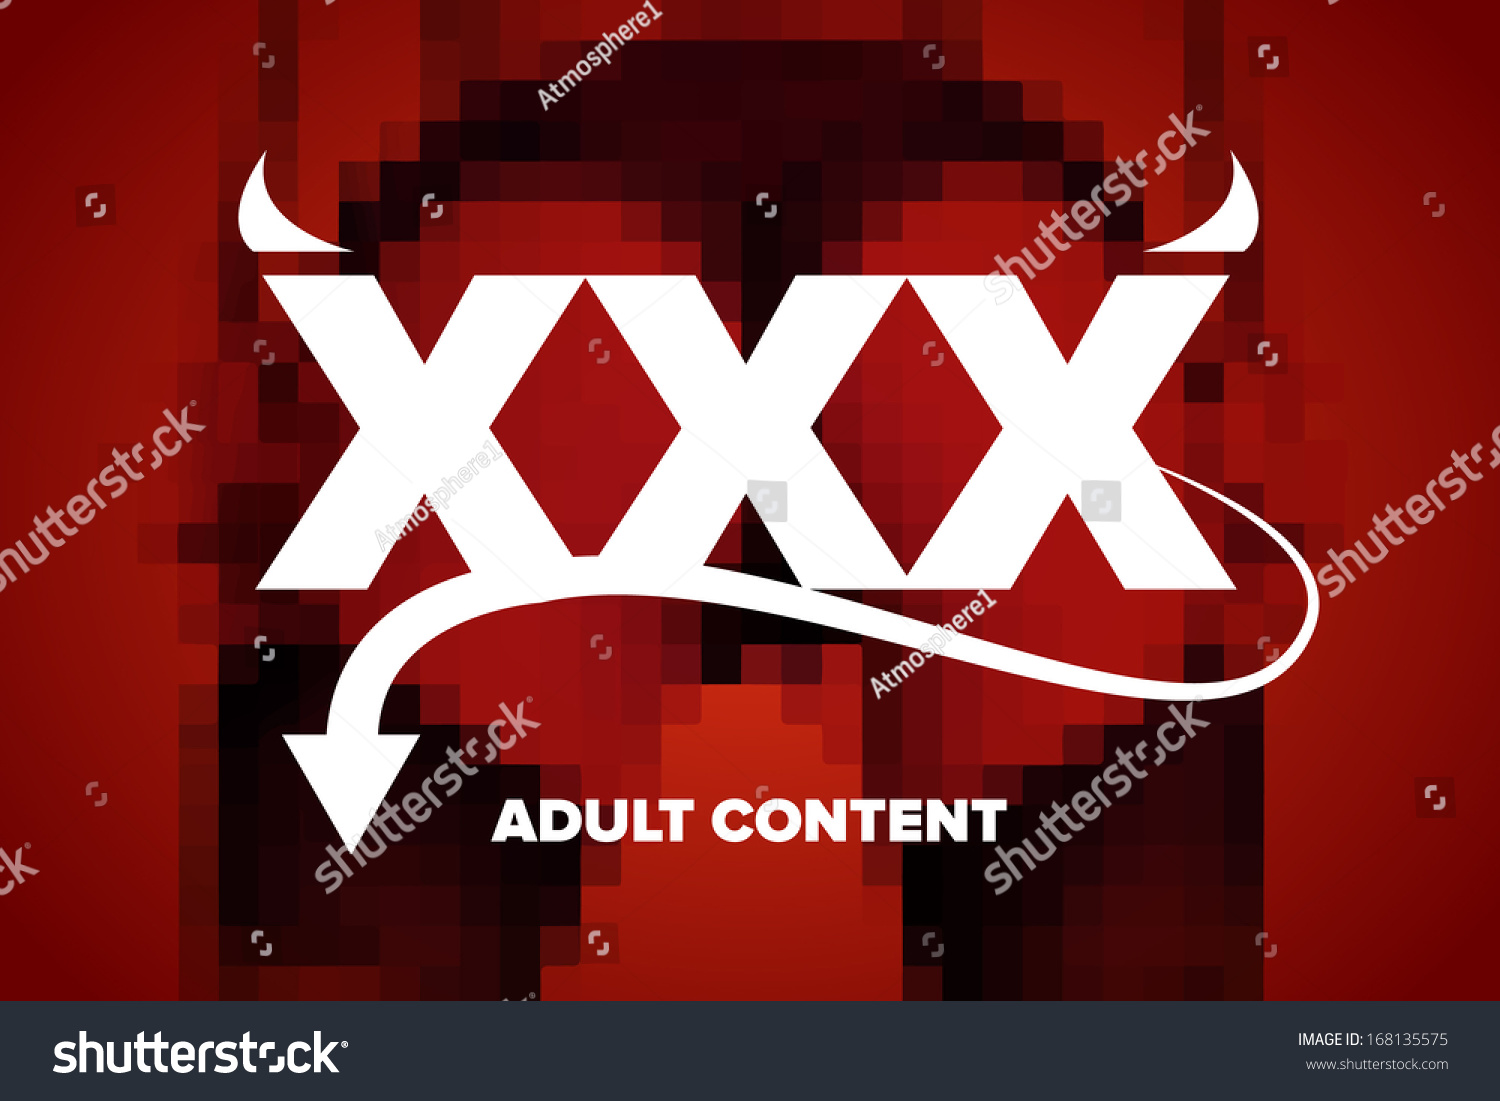 Xxx Sexy Adult Content Warning Graphics Stock Vector